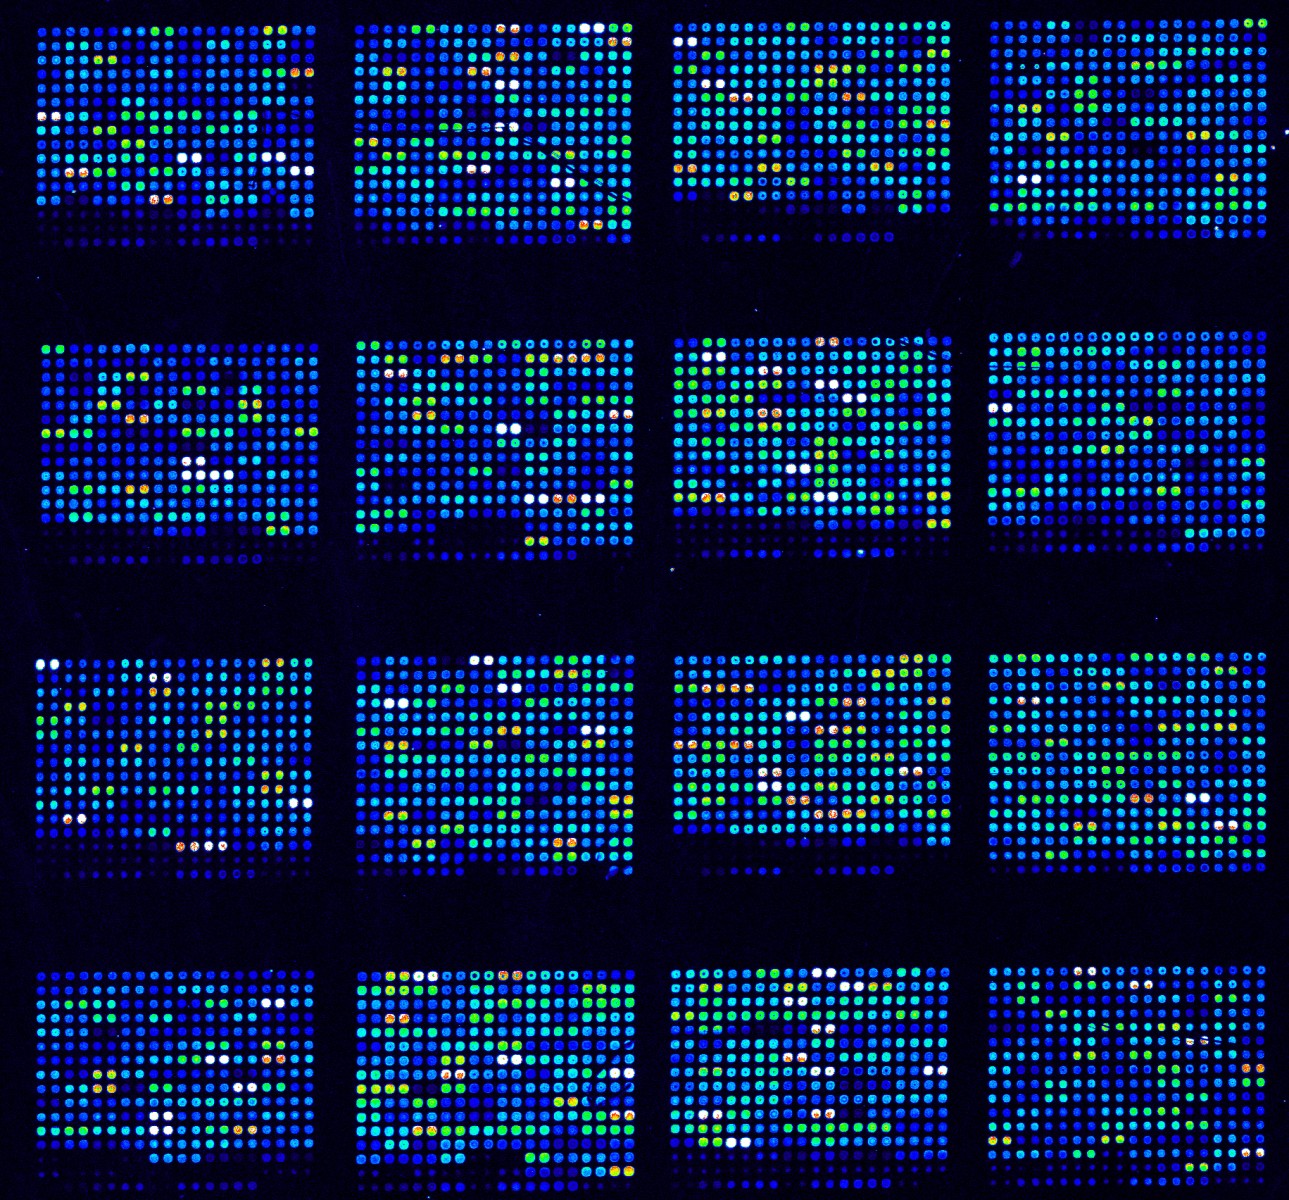 DNA microarrays are used in biological research to simultaneously measure the expression of thousand of genes